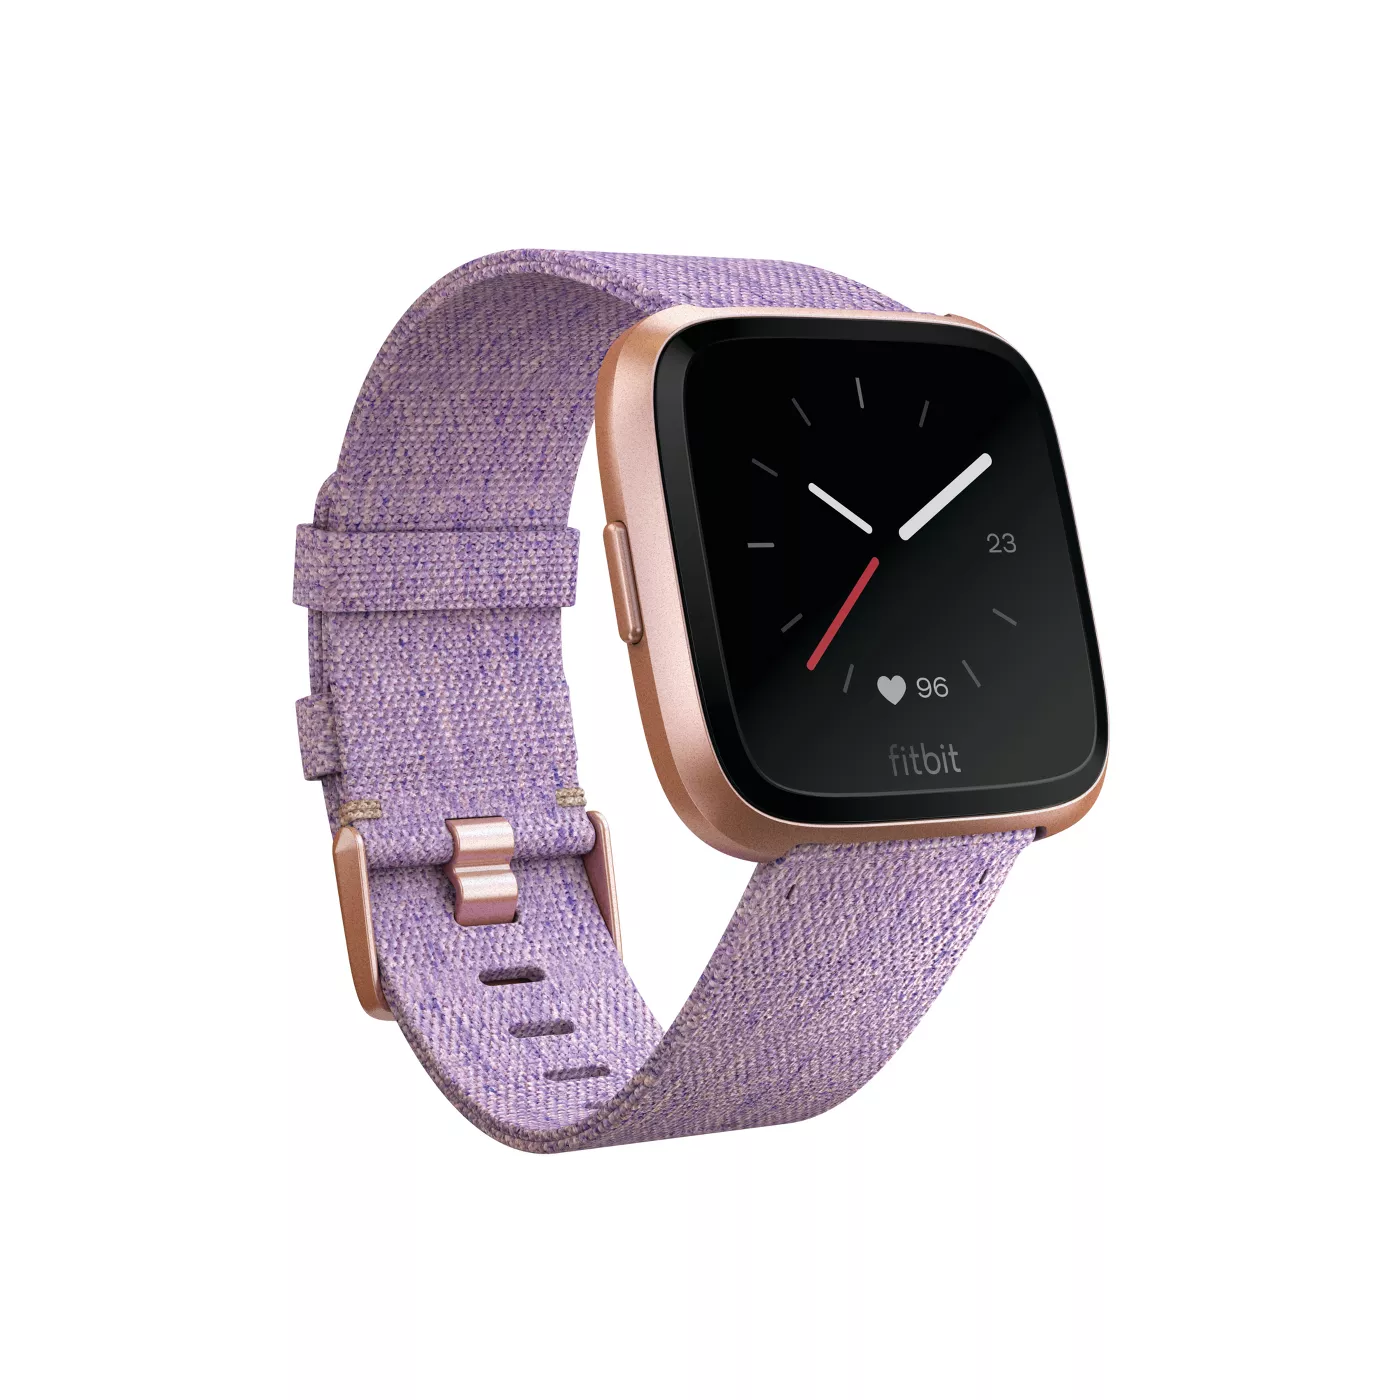 Fitbit Versa Smartwatch with Small & Large Bands - Special Edition - image 1 of 3